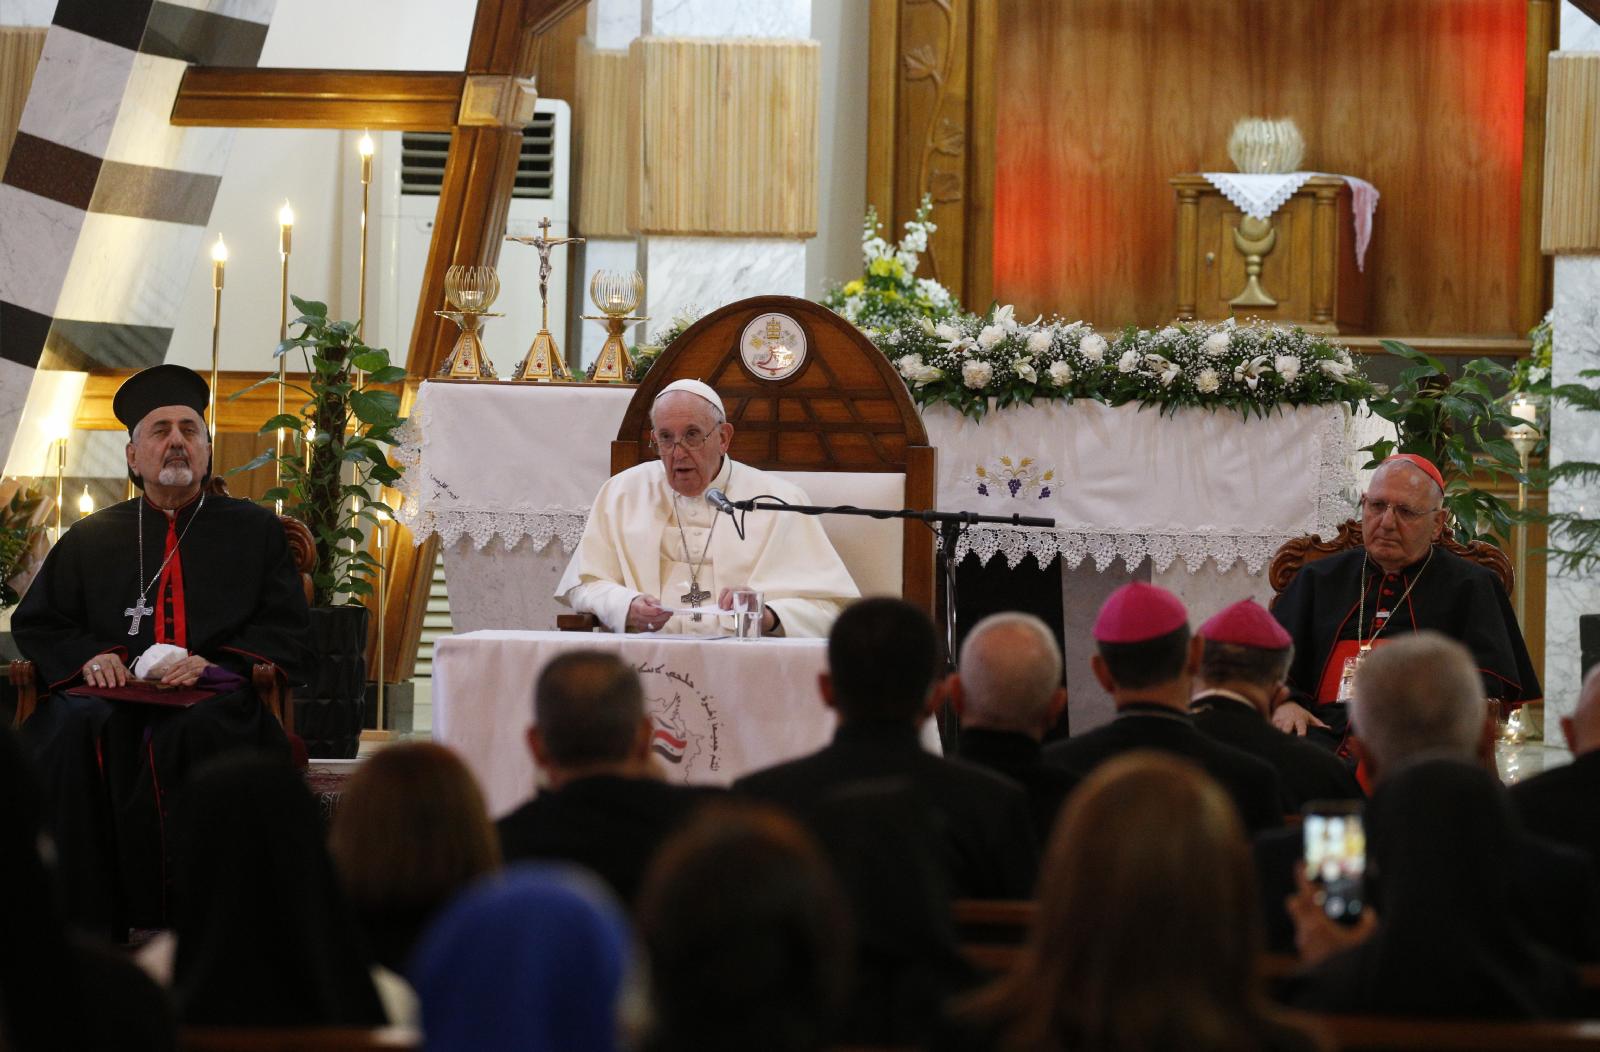 Honour martyrs by staying faithful, say Pope